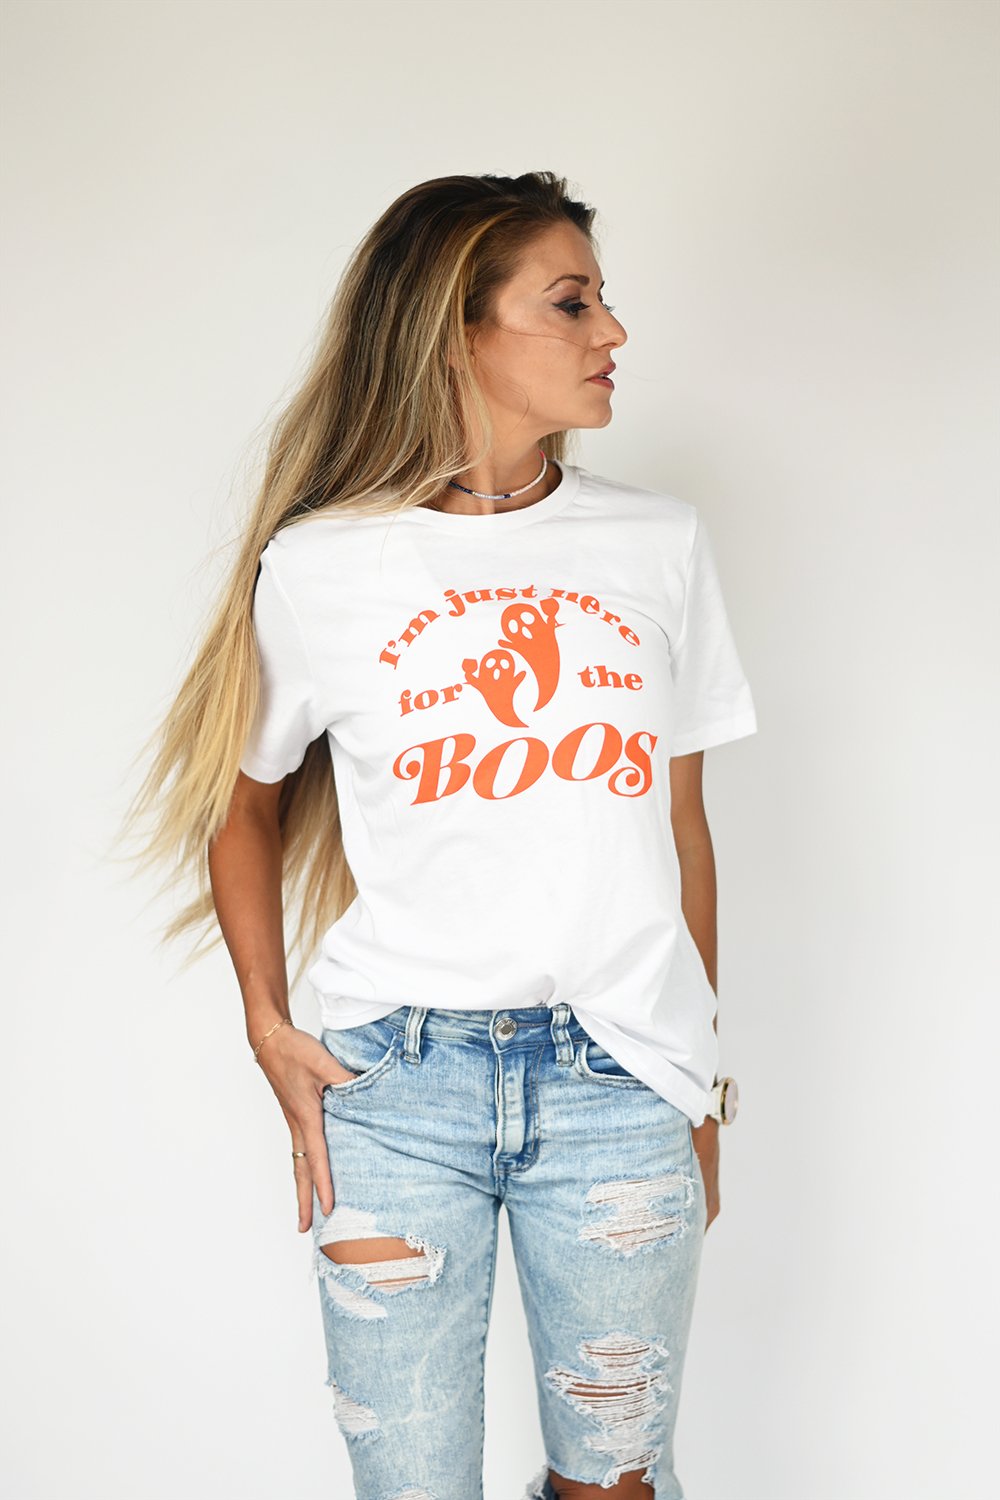 Here for the Boos T-Shirt - Sarah Marie Design Studio